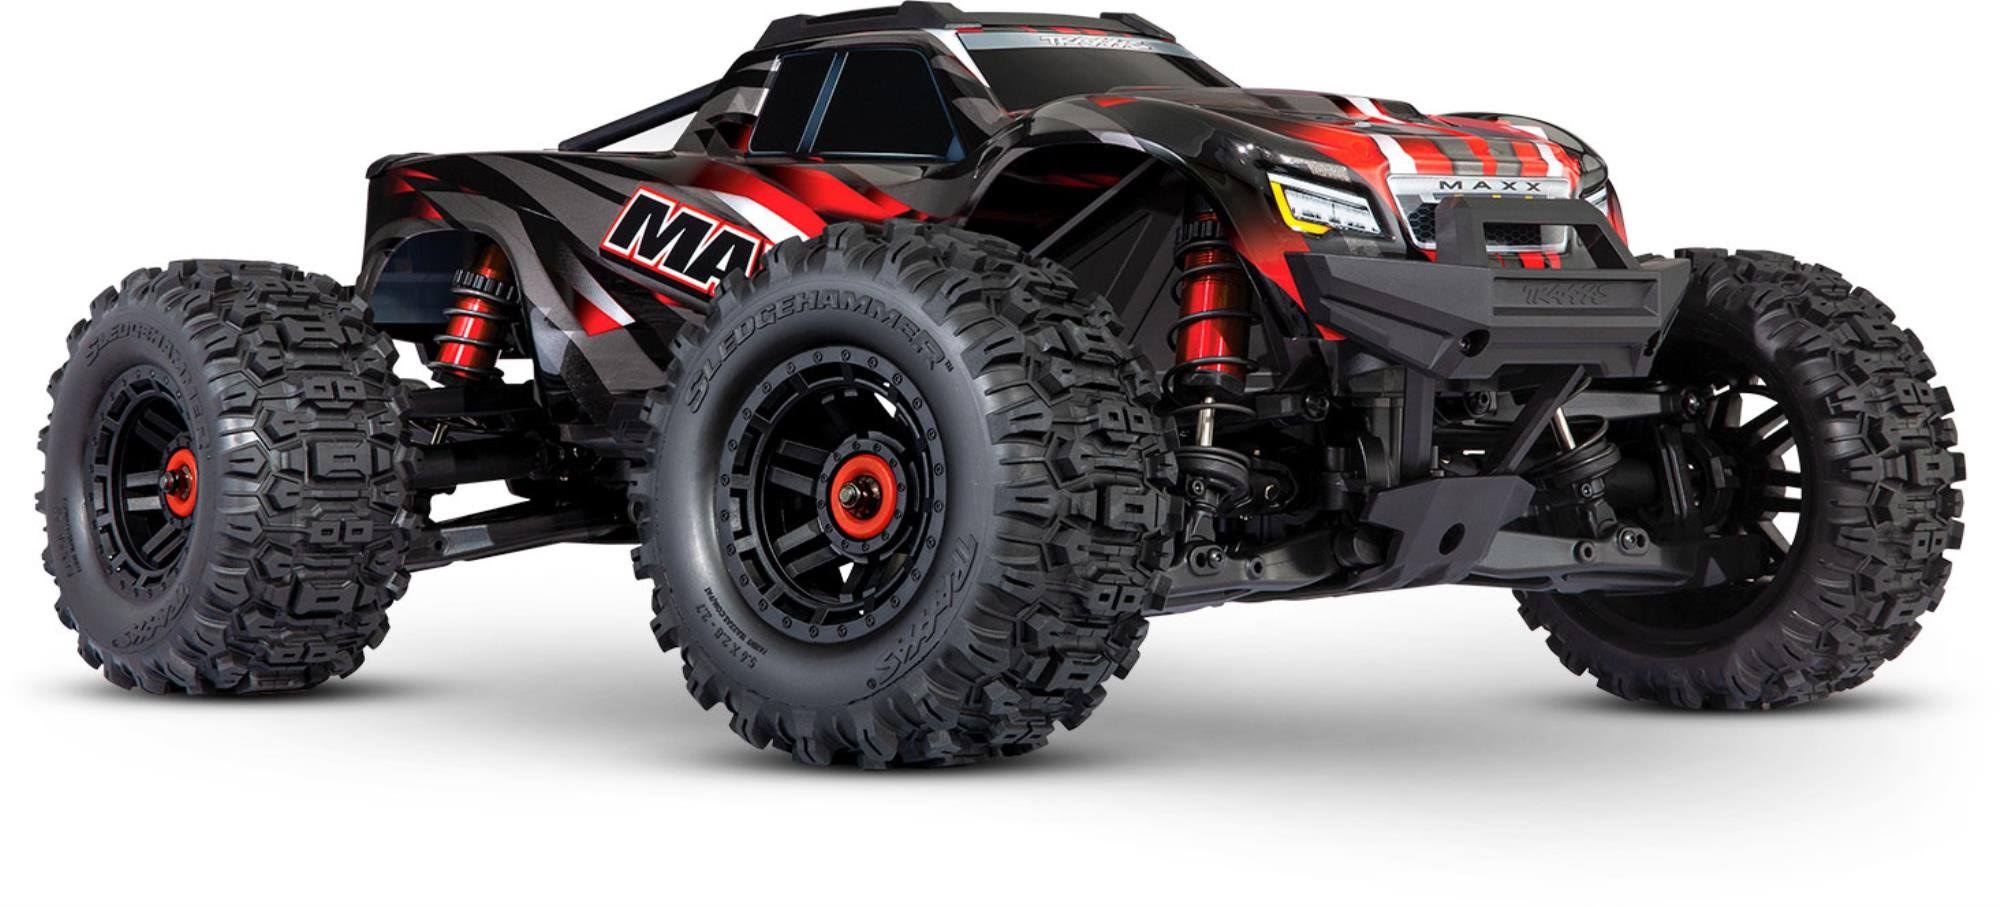 Traxxas Maxx V2 with WideMaxx 1/10 Electric RC Monster Truck Red 89086-4